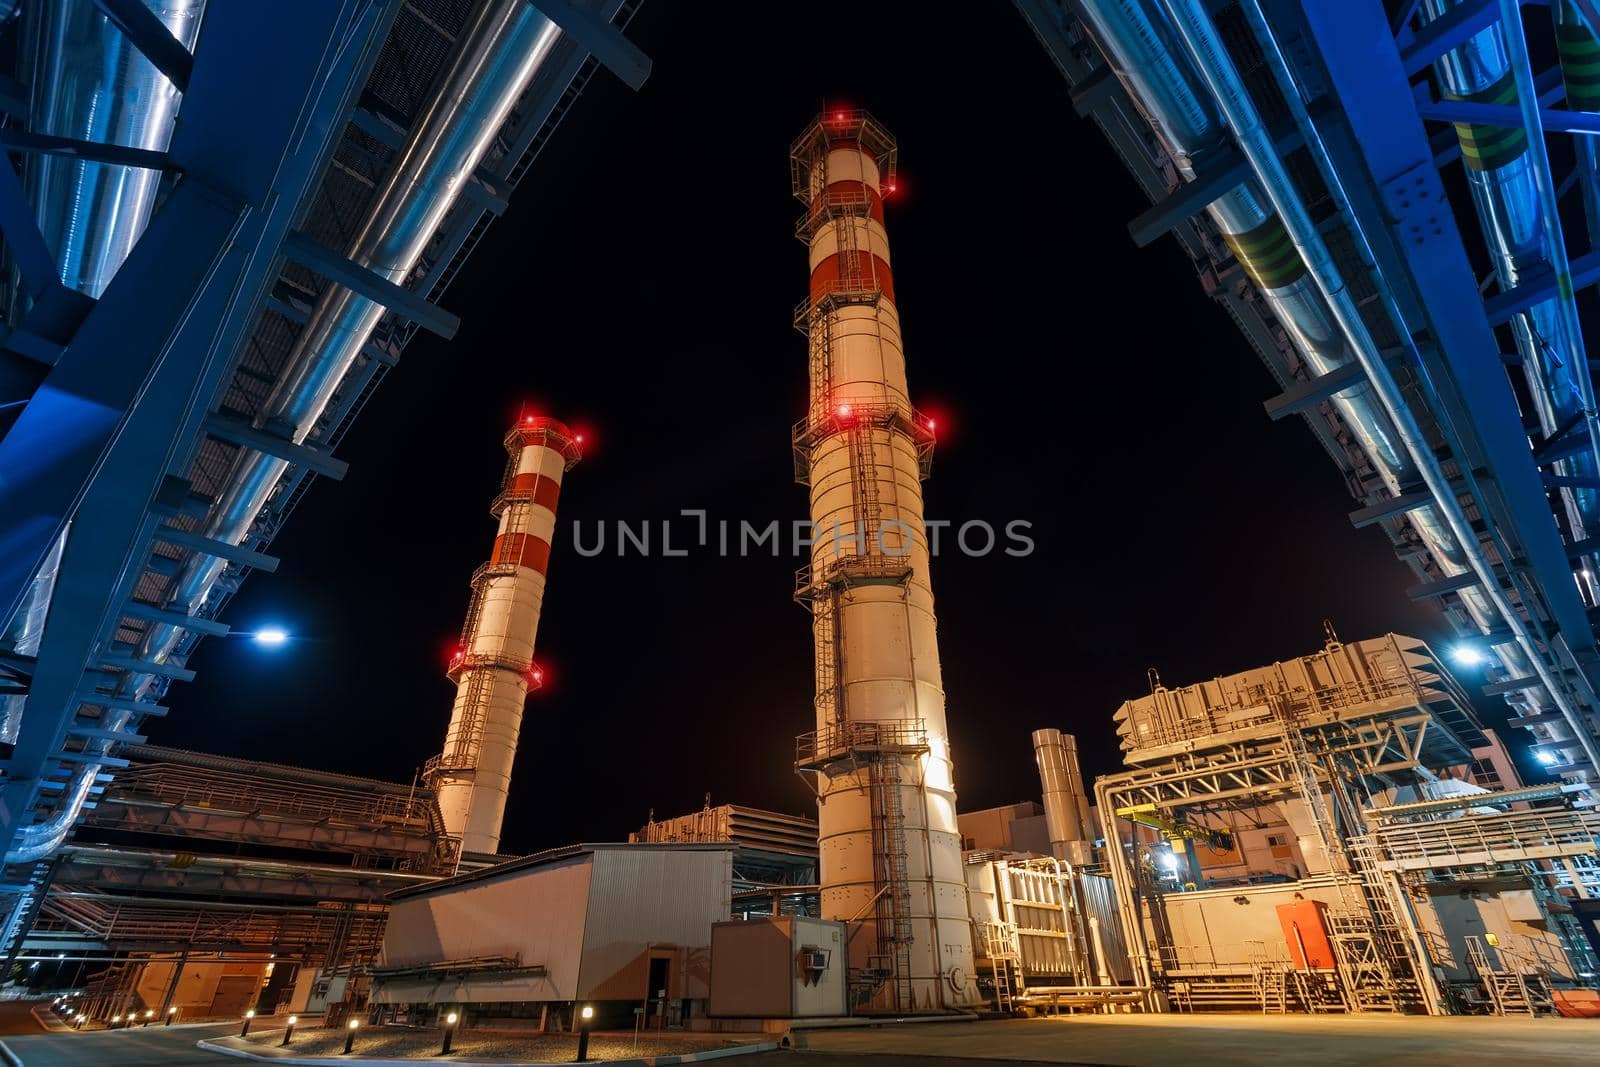 power station at night net gas production by AlexGrec